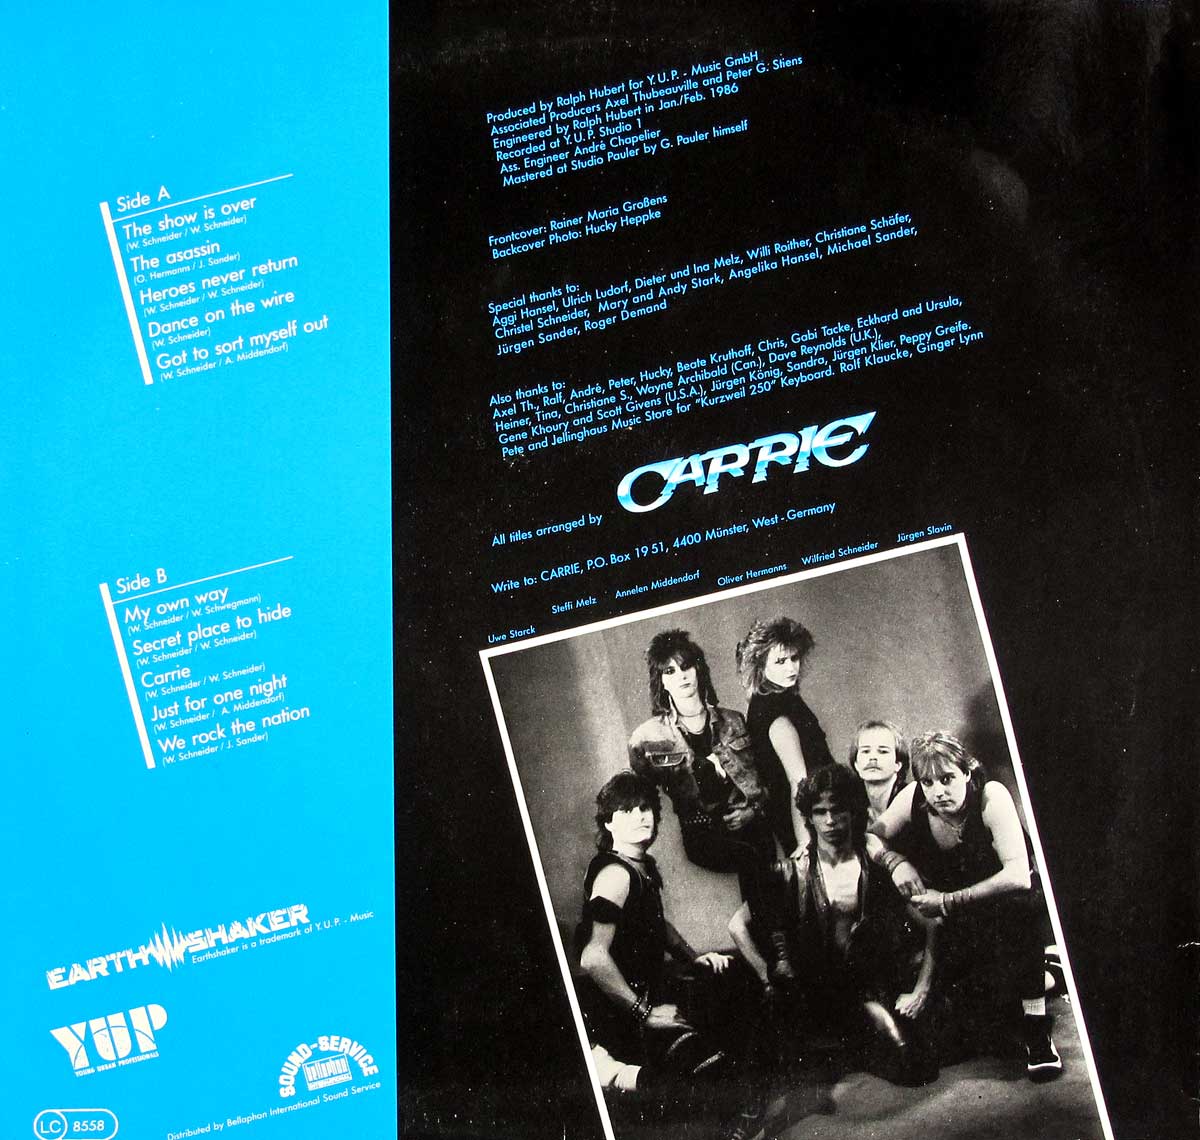 Black and White photo of the Carrie-band on the back cover of the Carrie album  